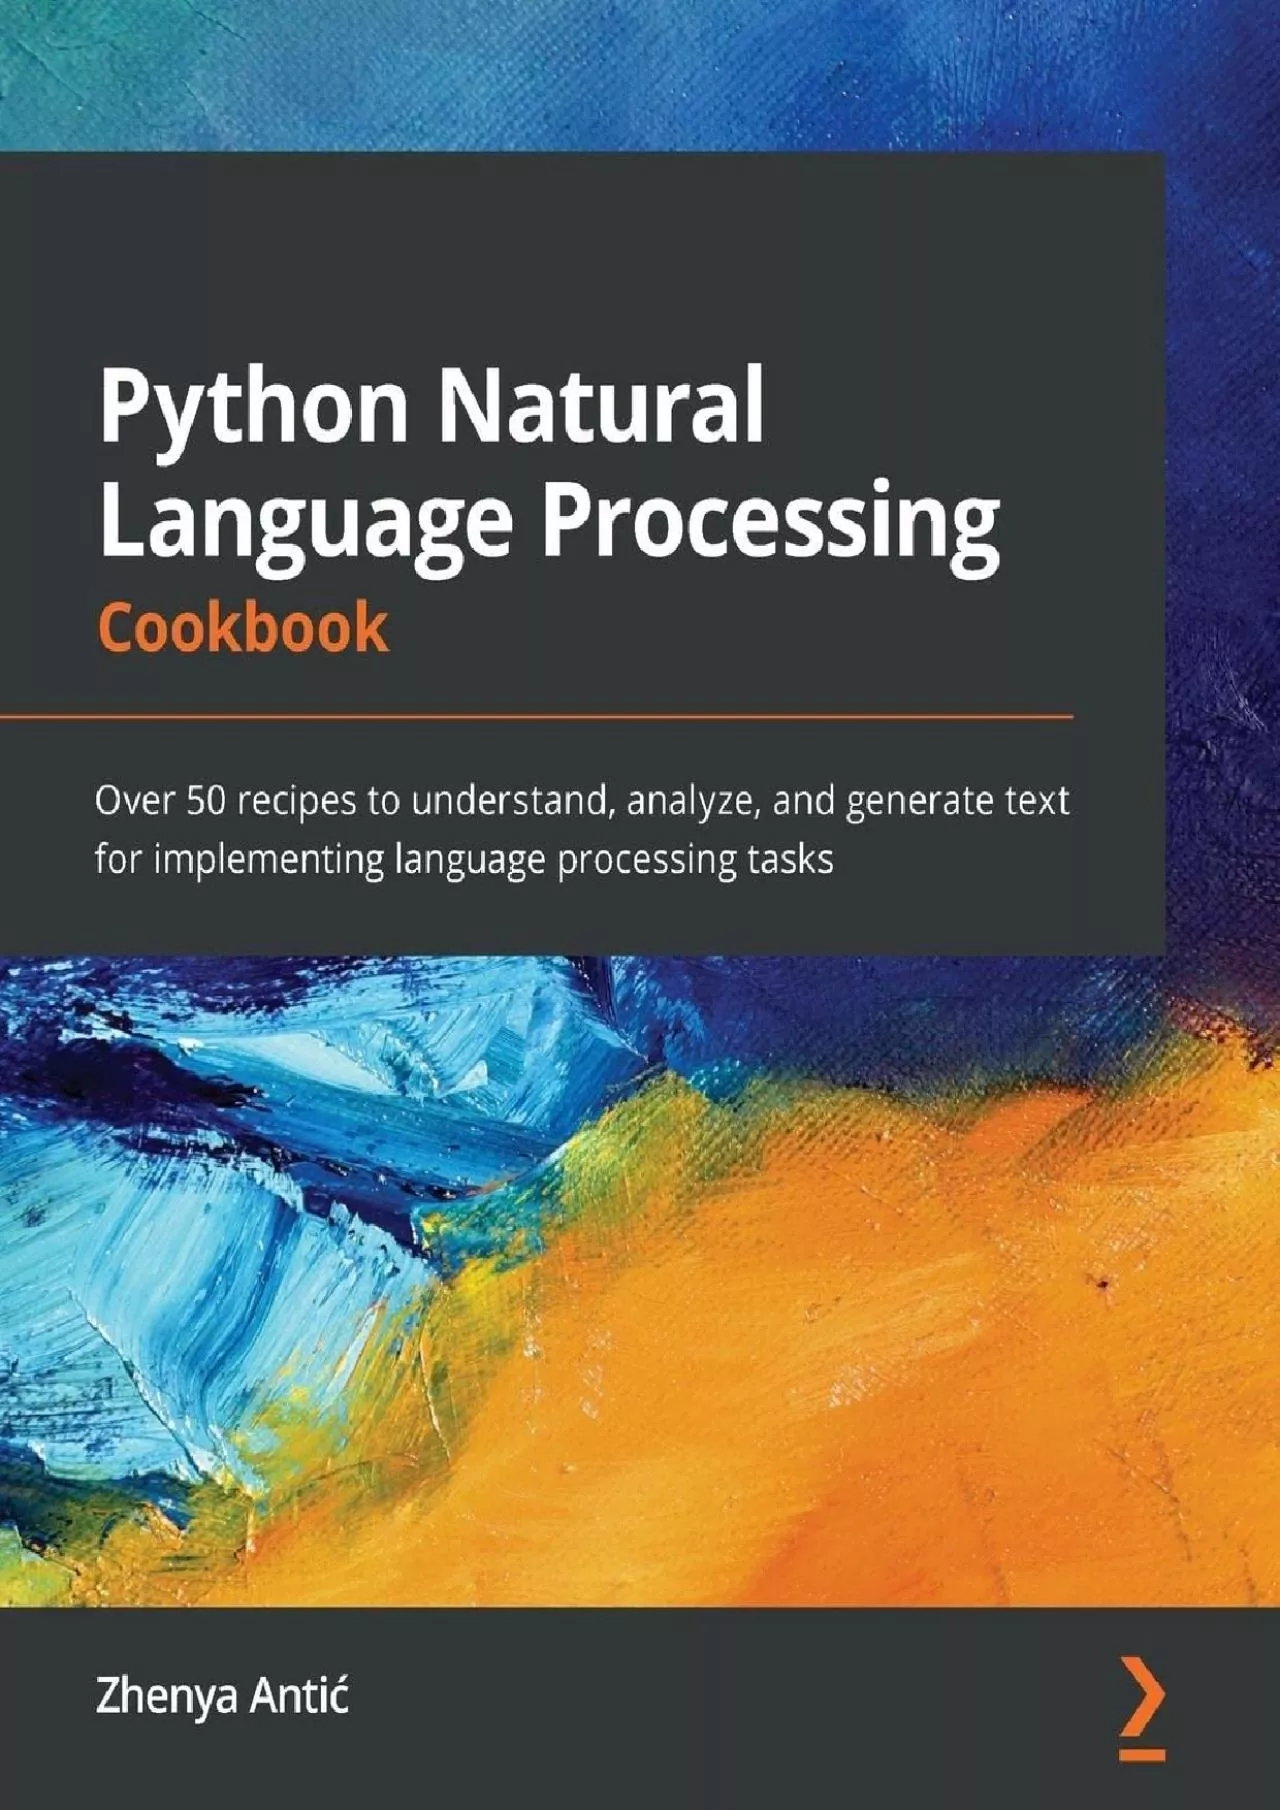 [READ]-Python Natural Language Processing Cookbook Over 50 recipes to understand, analyze,